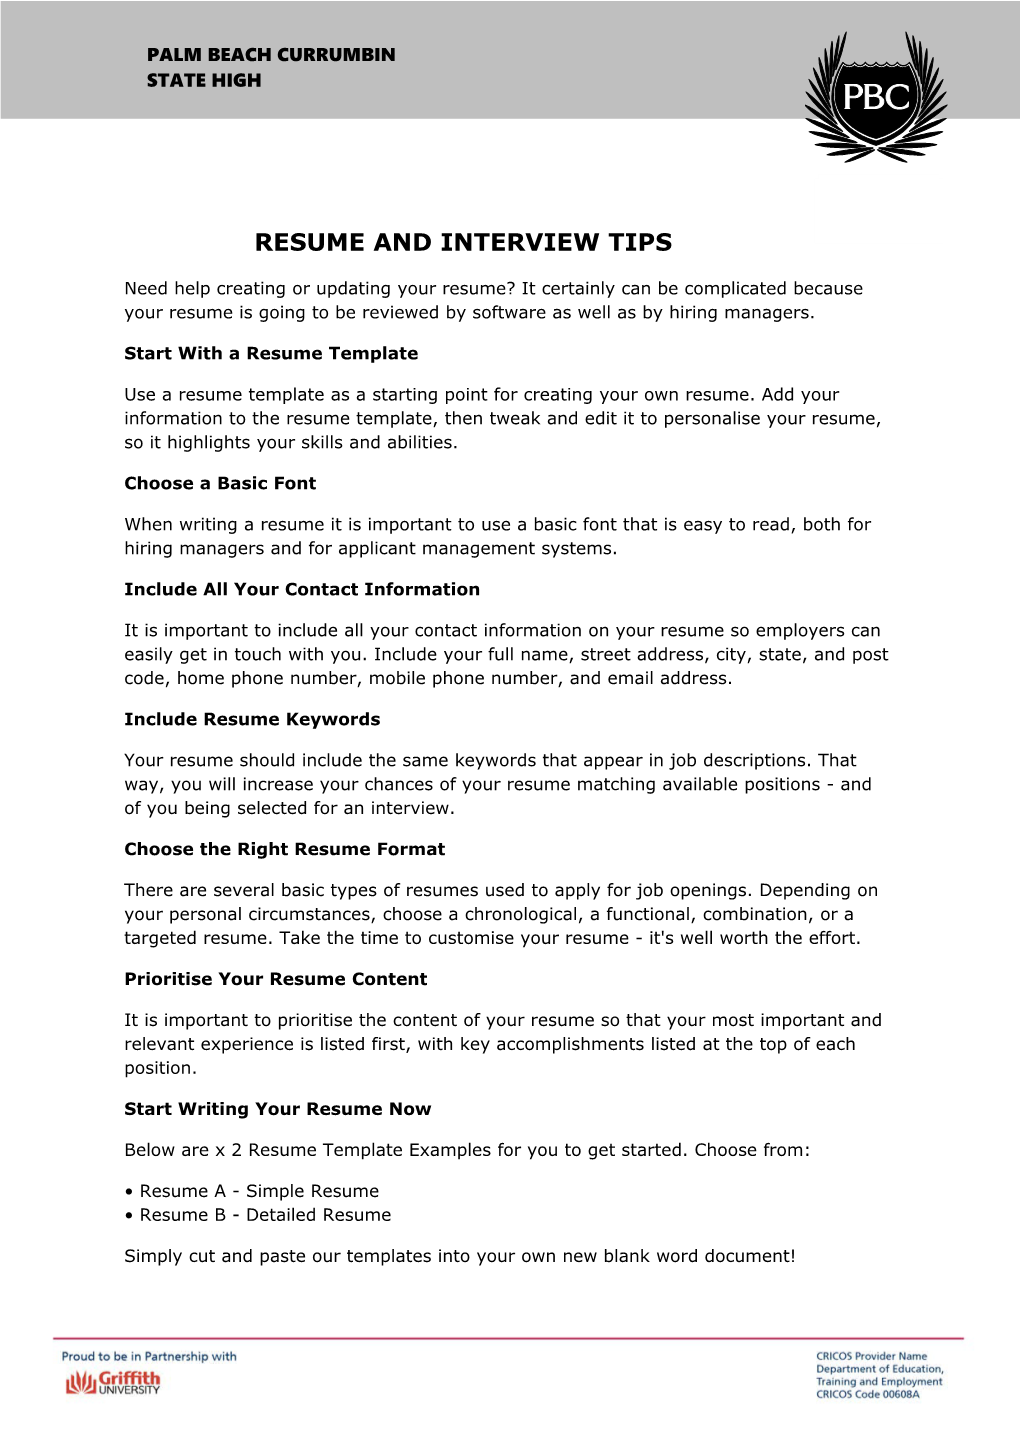 Resume and Interview Tips (DOC, 370 KB)